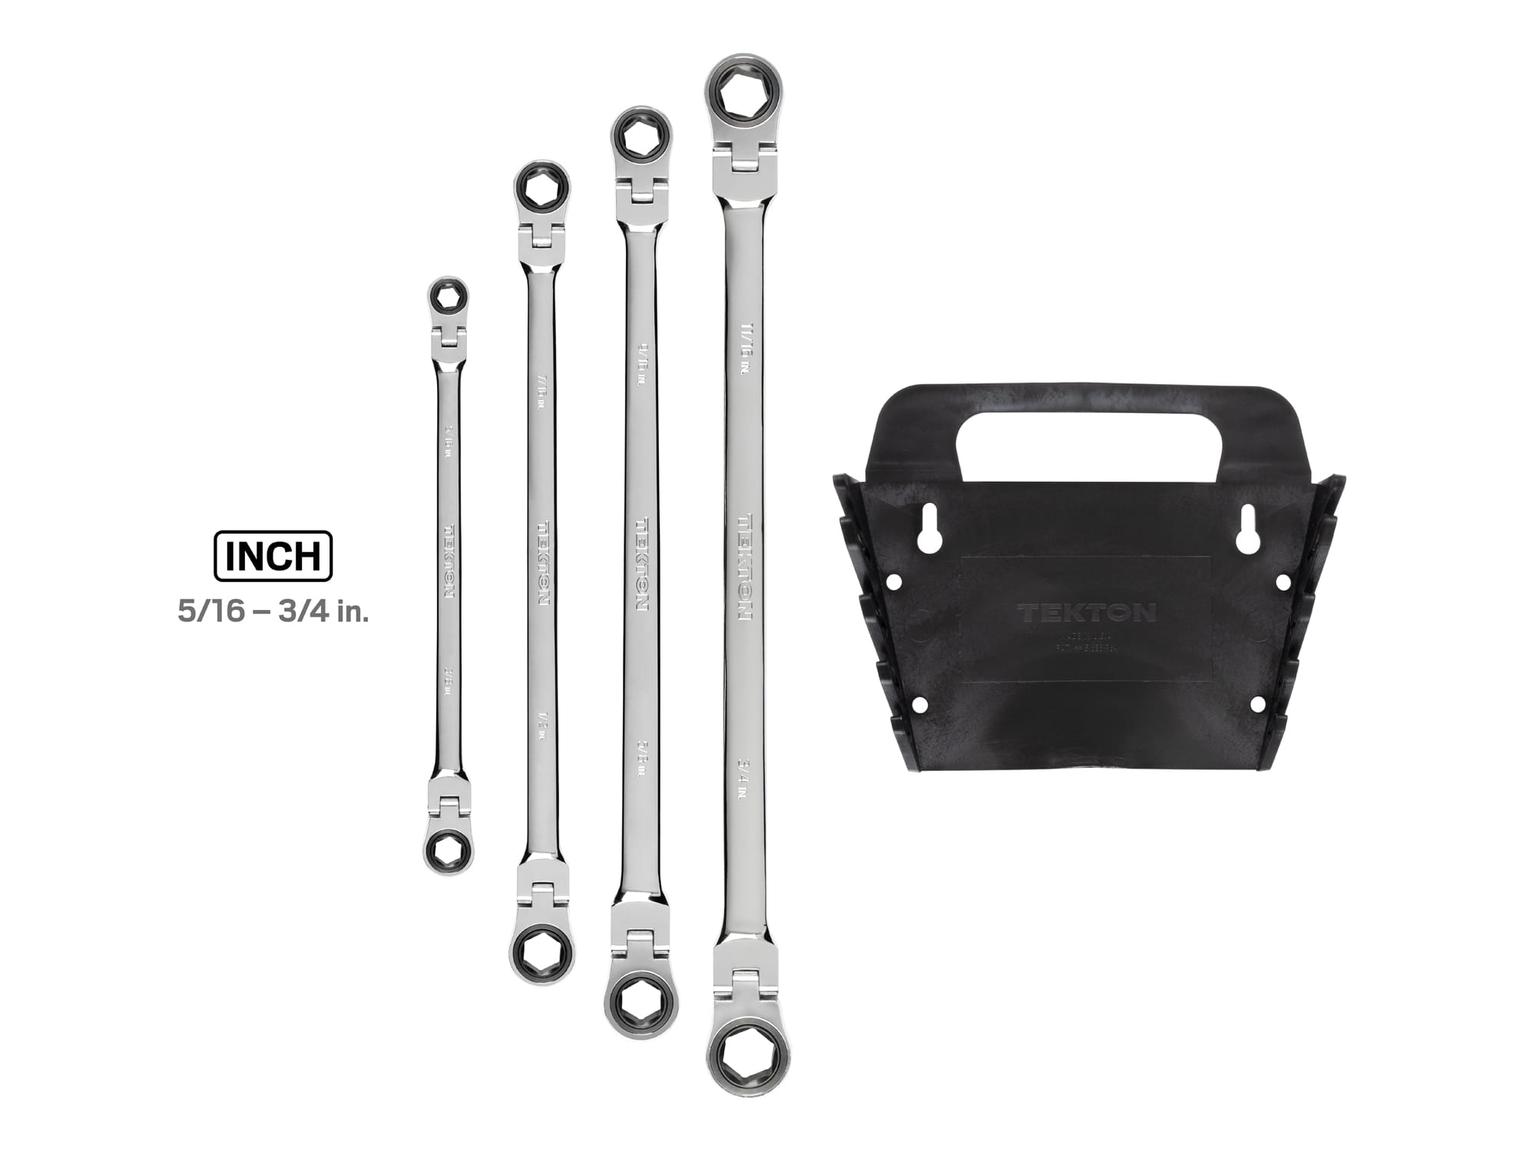 TEKTON WRN77062-T Long Flex Ratcheting Box End Wrench Set with Holder, 4-Piece (5/16-3/4 in.)